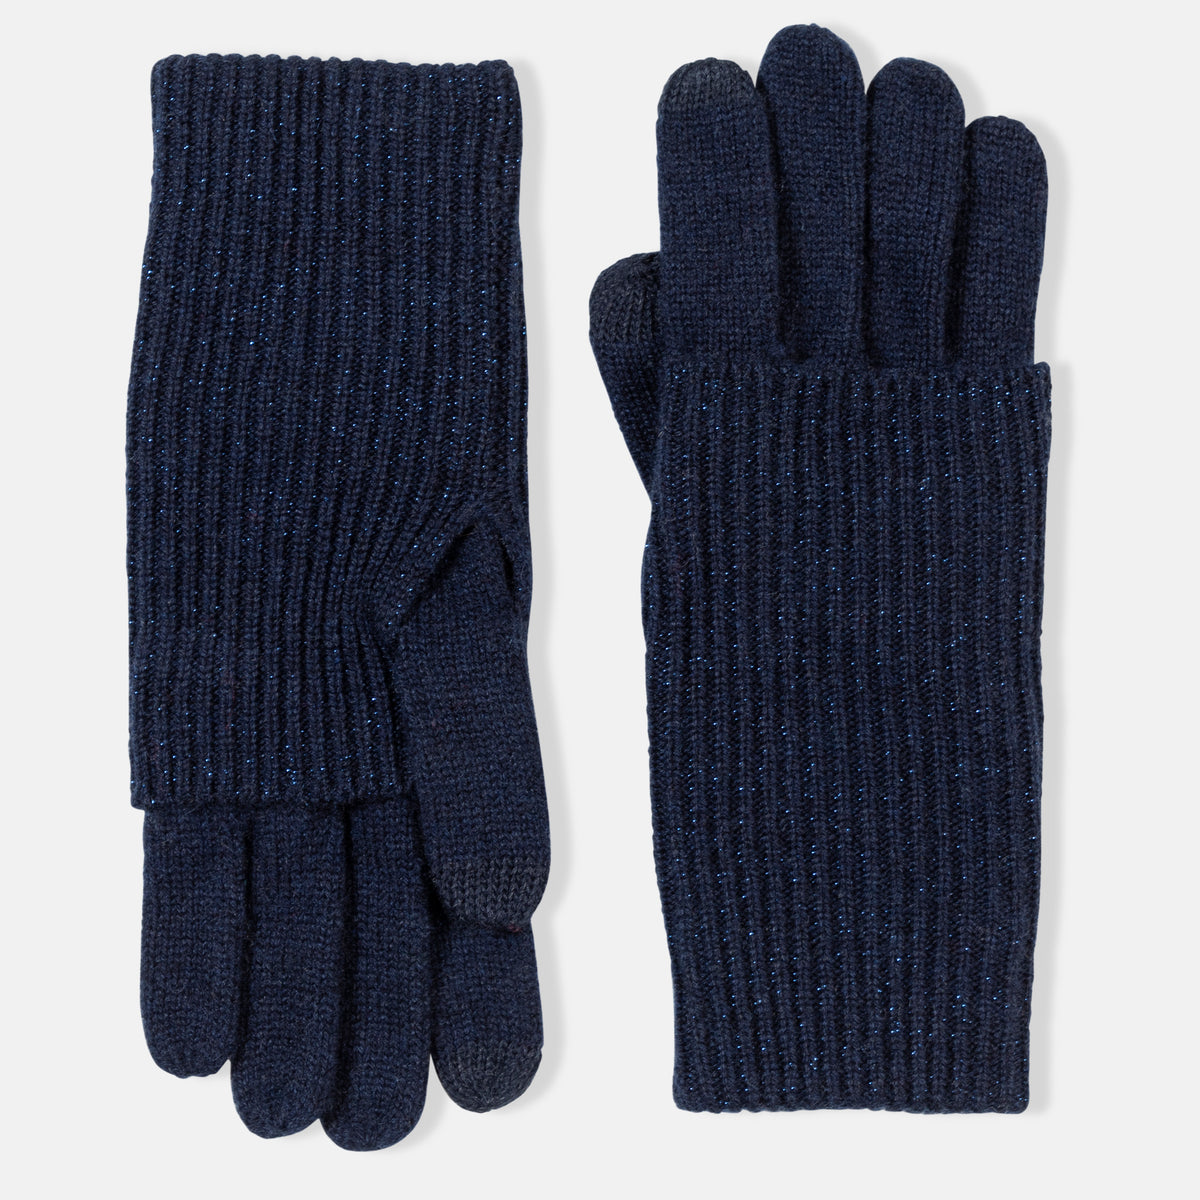 Picture of knitted cashmere gloves with foldover contrast sparkle cuff in navy and dark navy.